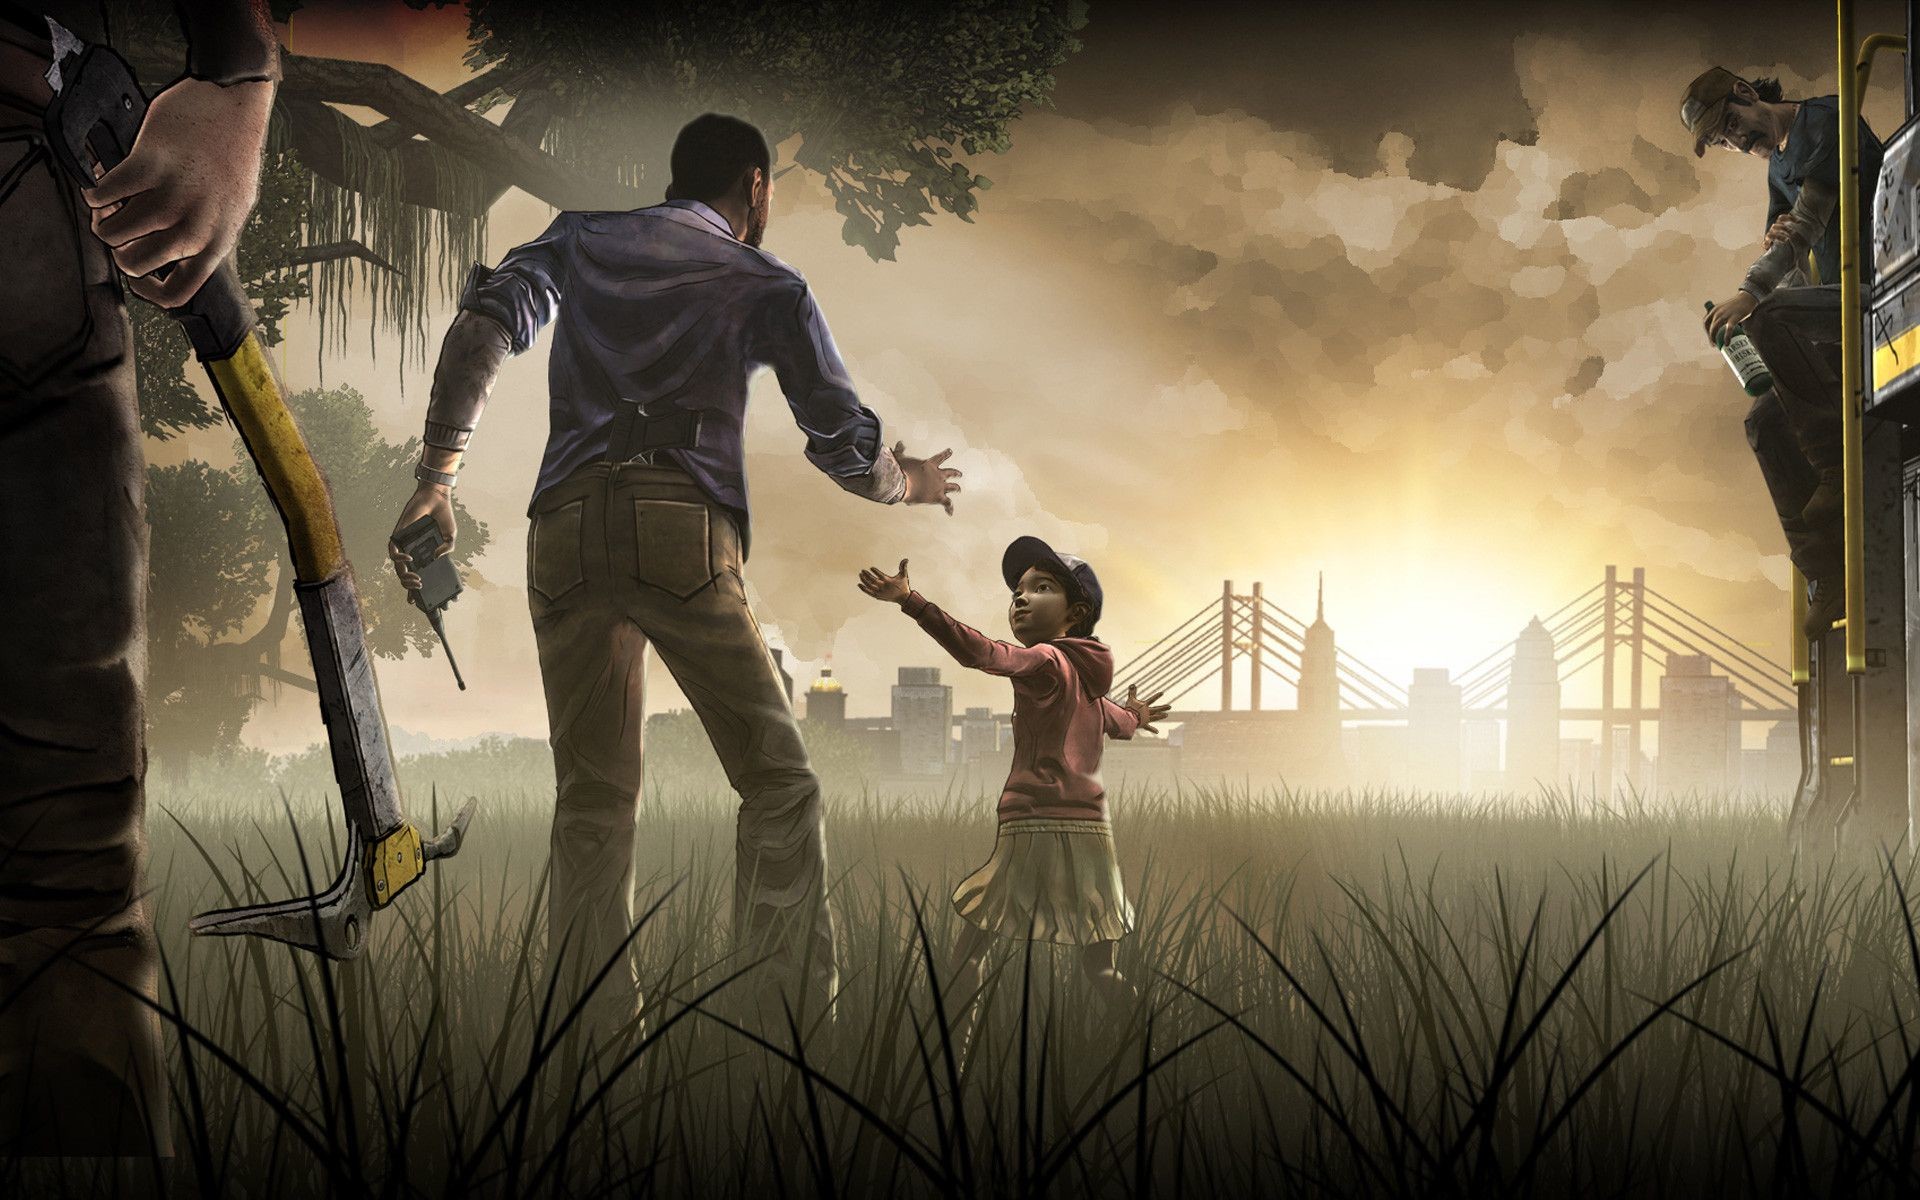 1920x1200 The Walking Dead Game Wallpapers (29 Wallpapers)